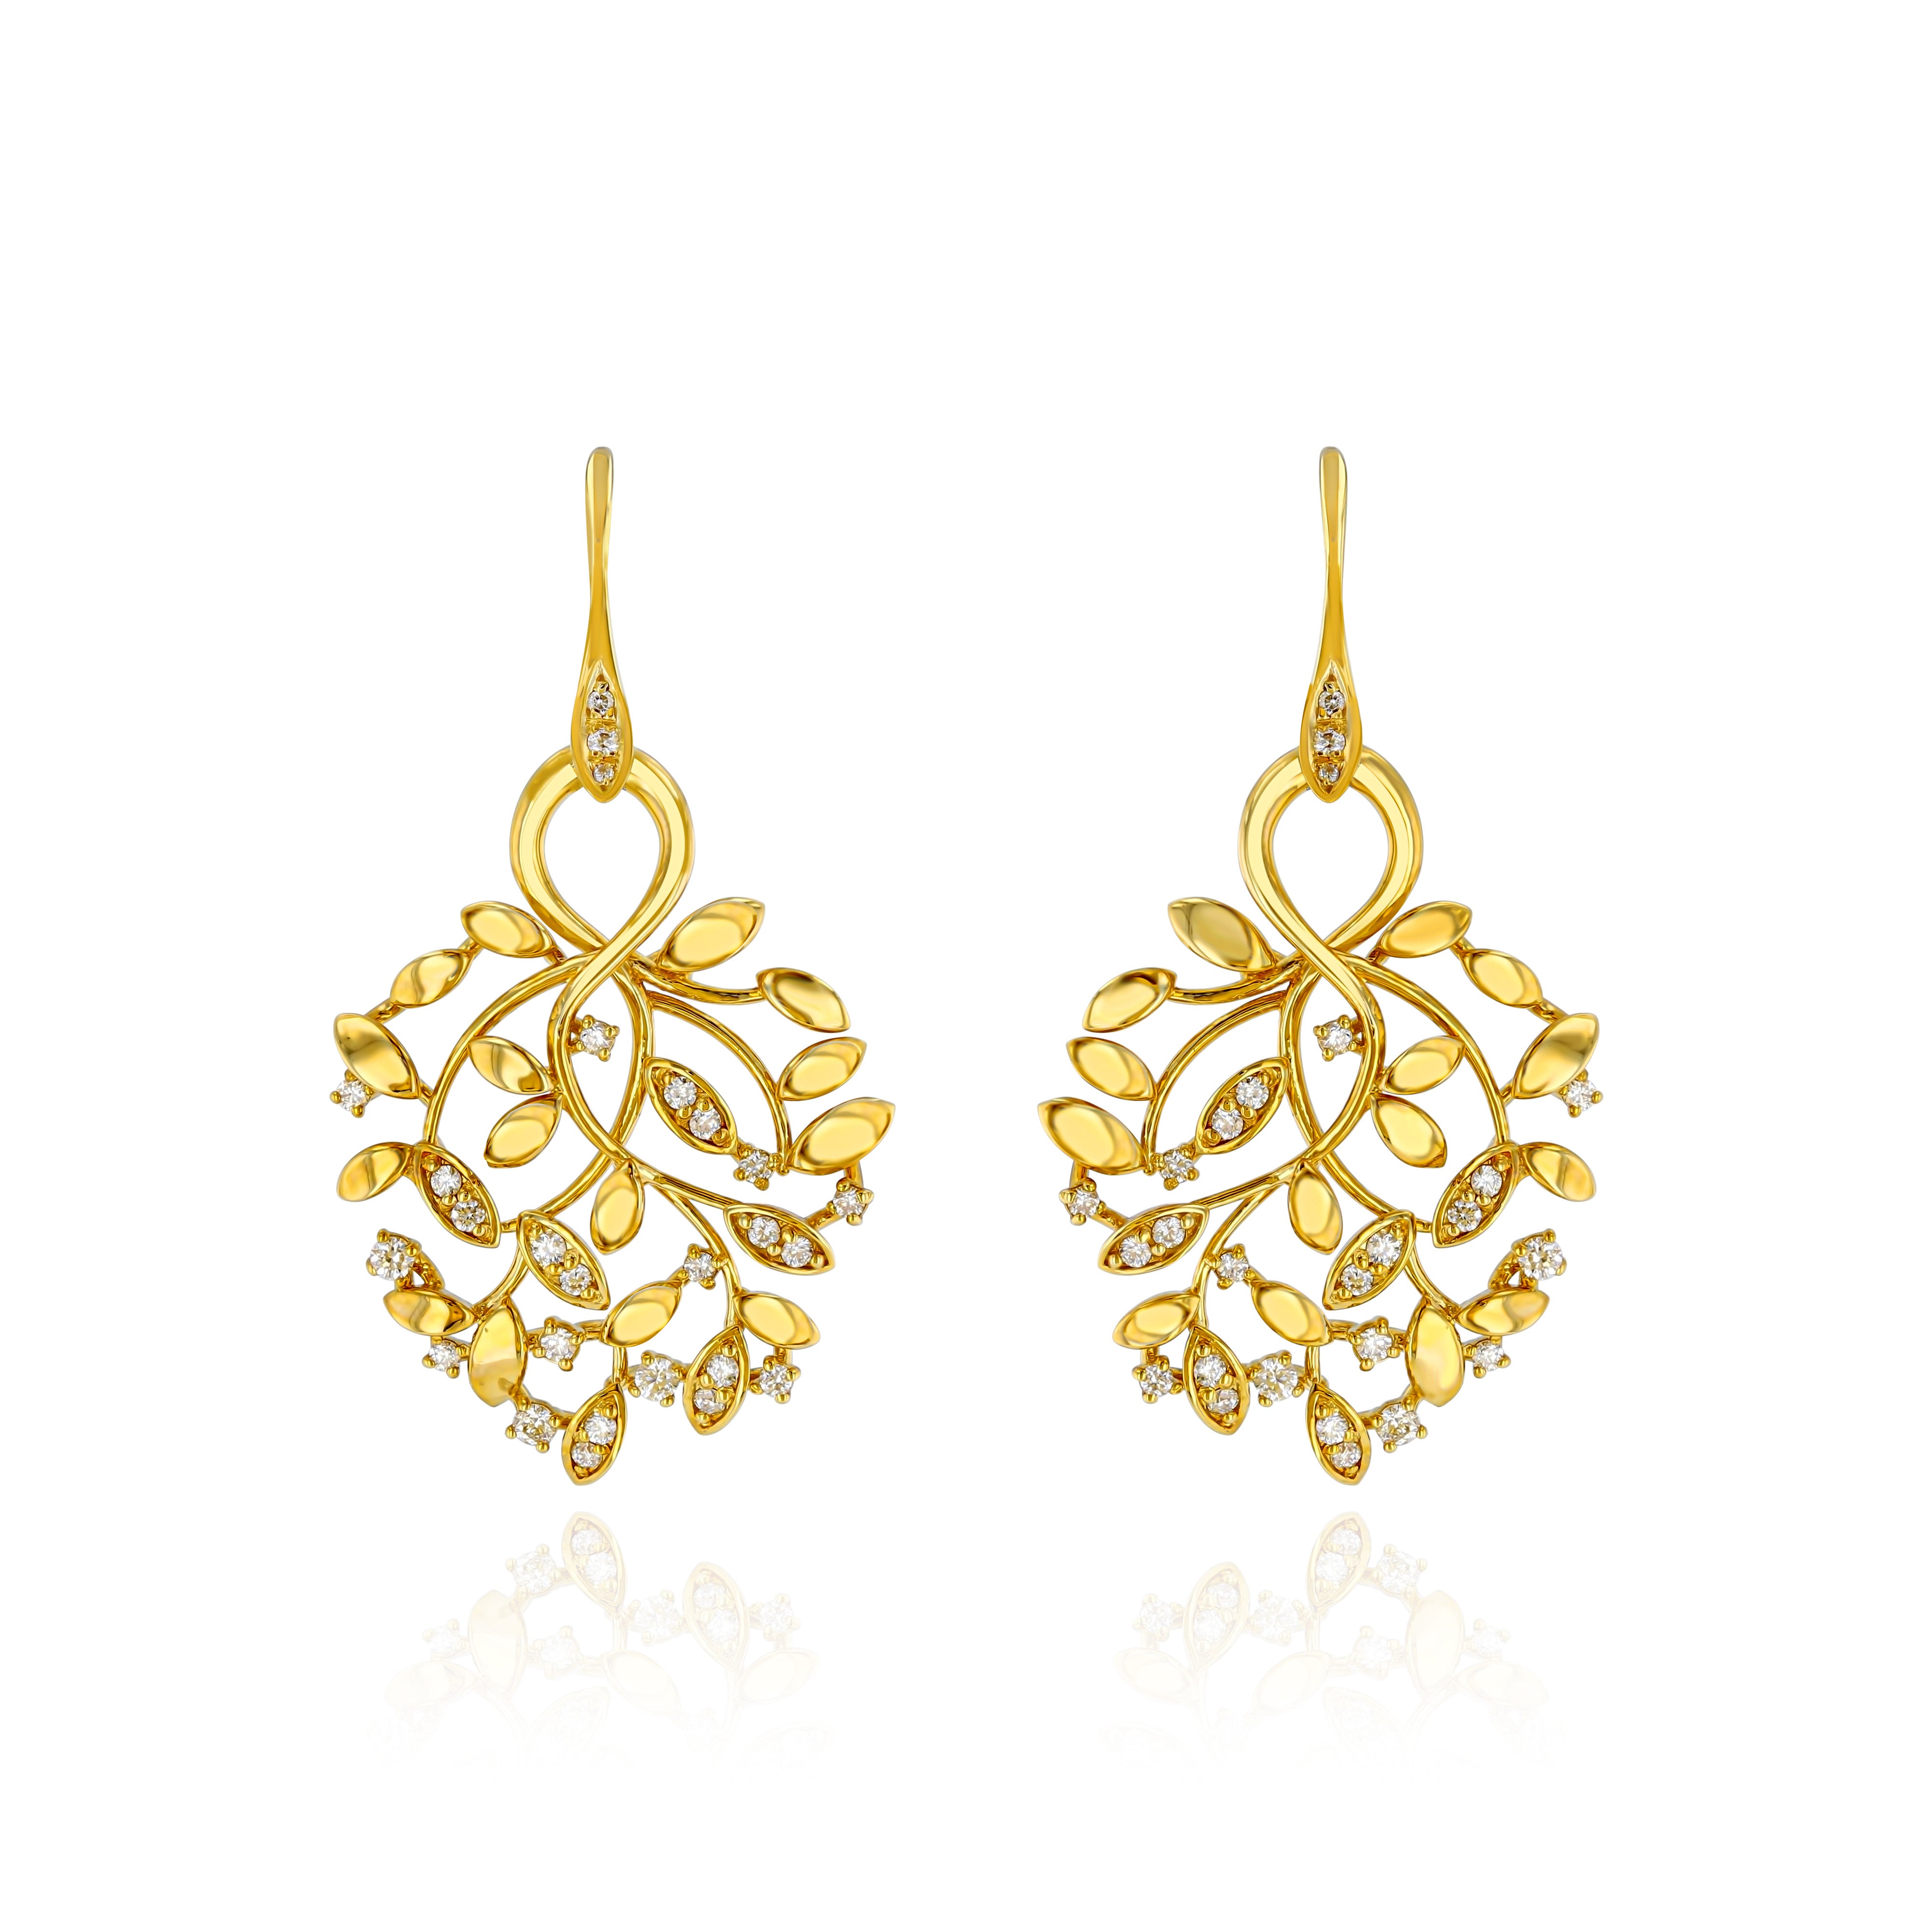 Yellow Gold Earrings, resembling a tree, with small round Diamonds, Large